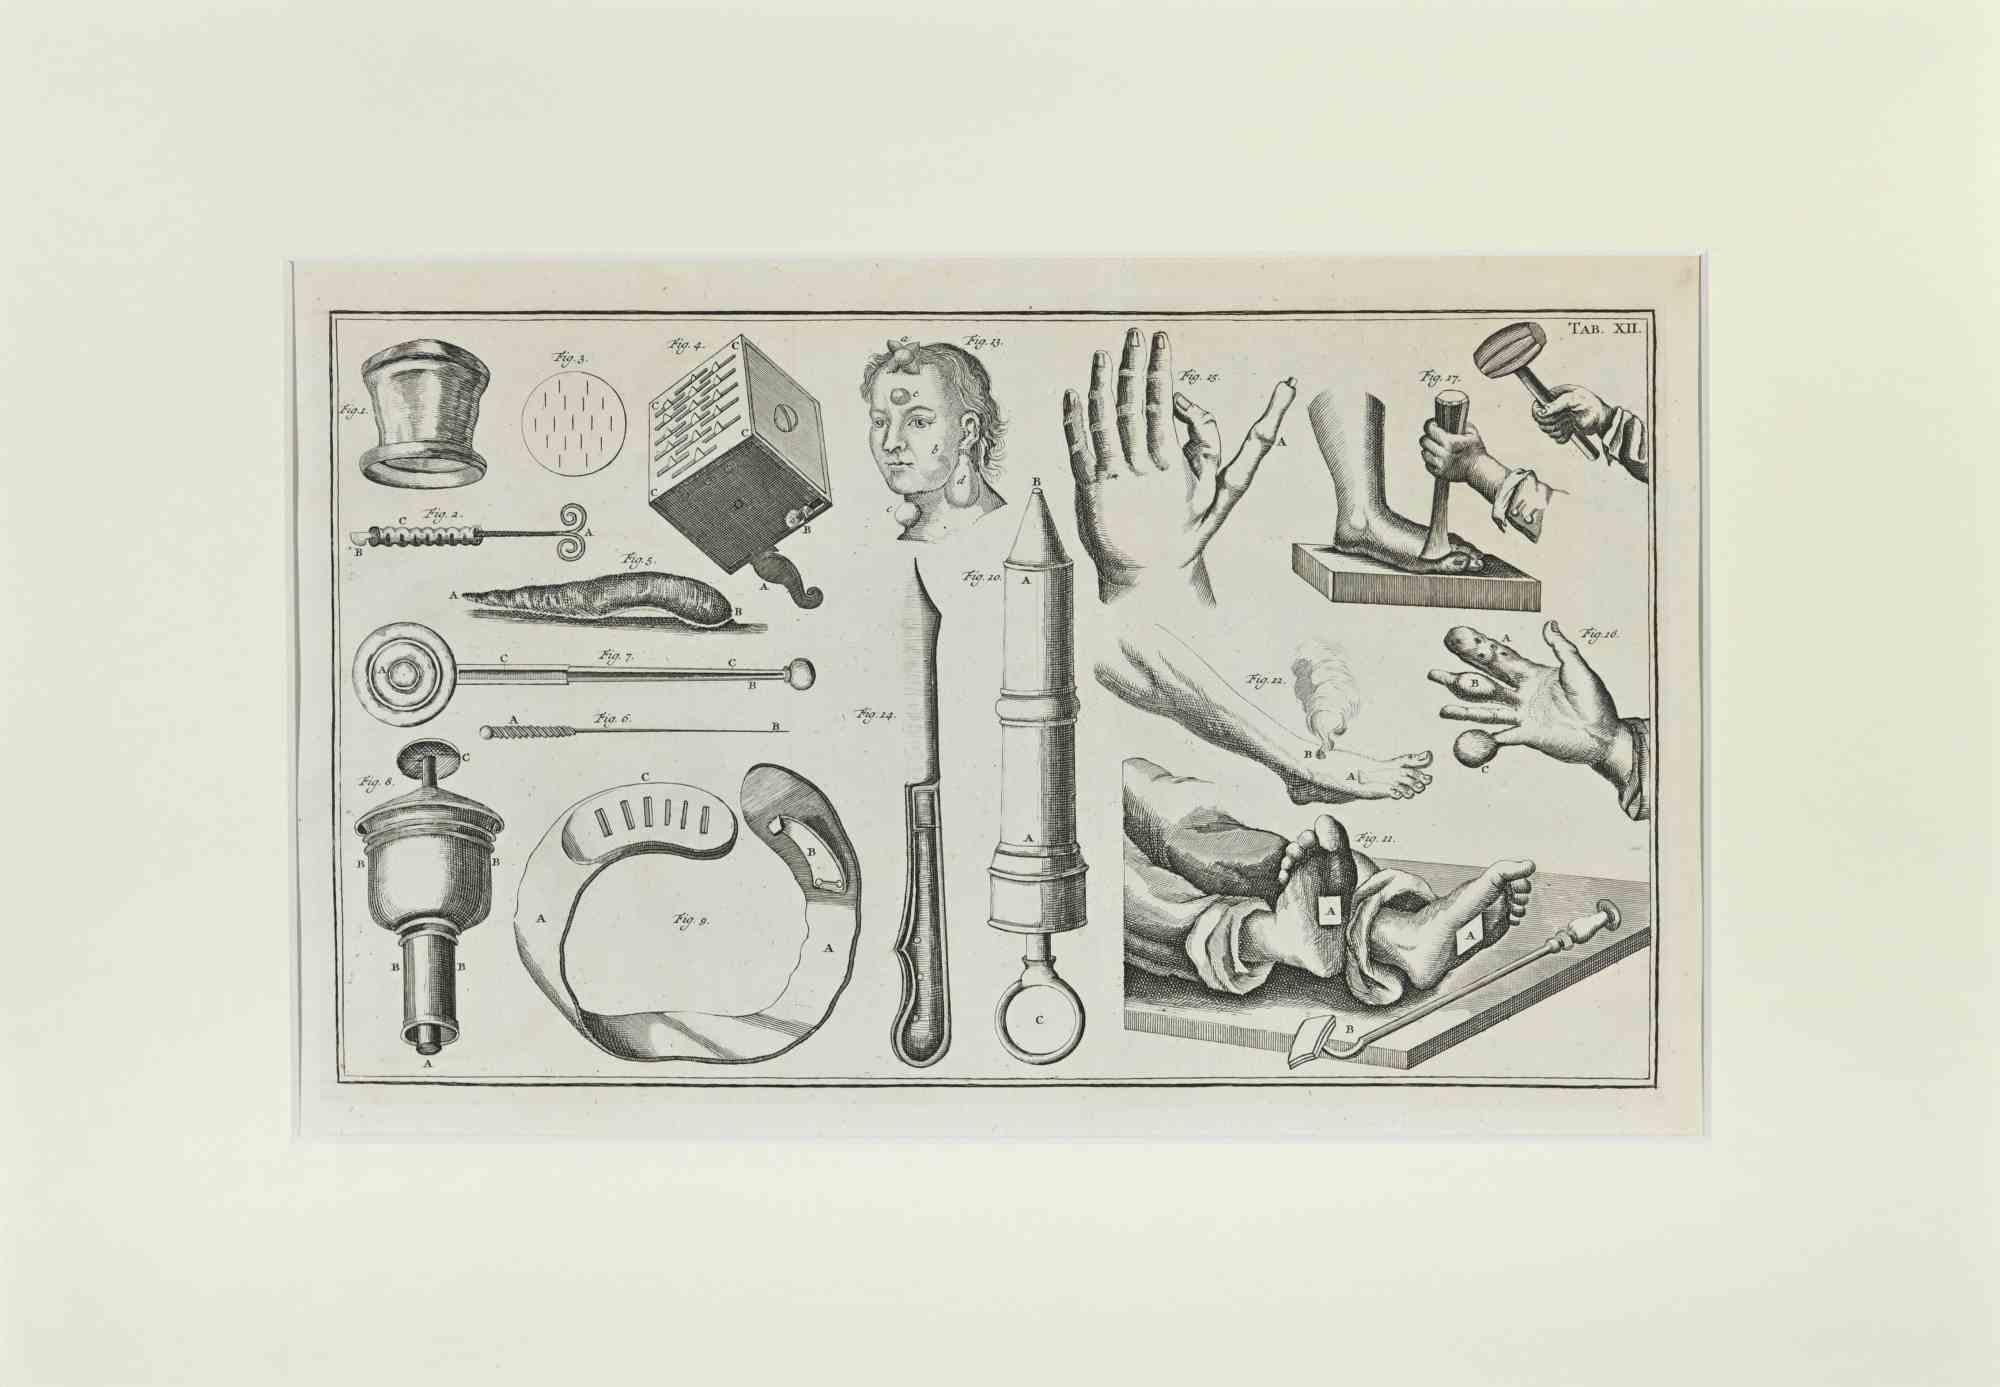 Surgical Instruments from the Suite Heister, Lorenz, realized by Lorenz Heister in the series of Institutiones chirurgicae. Amsterdam, Janssonius-Waesberg, 1750.

Etching on paper

The work belongs to the Latin edition of the famous work by the